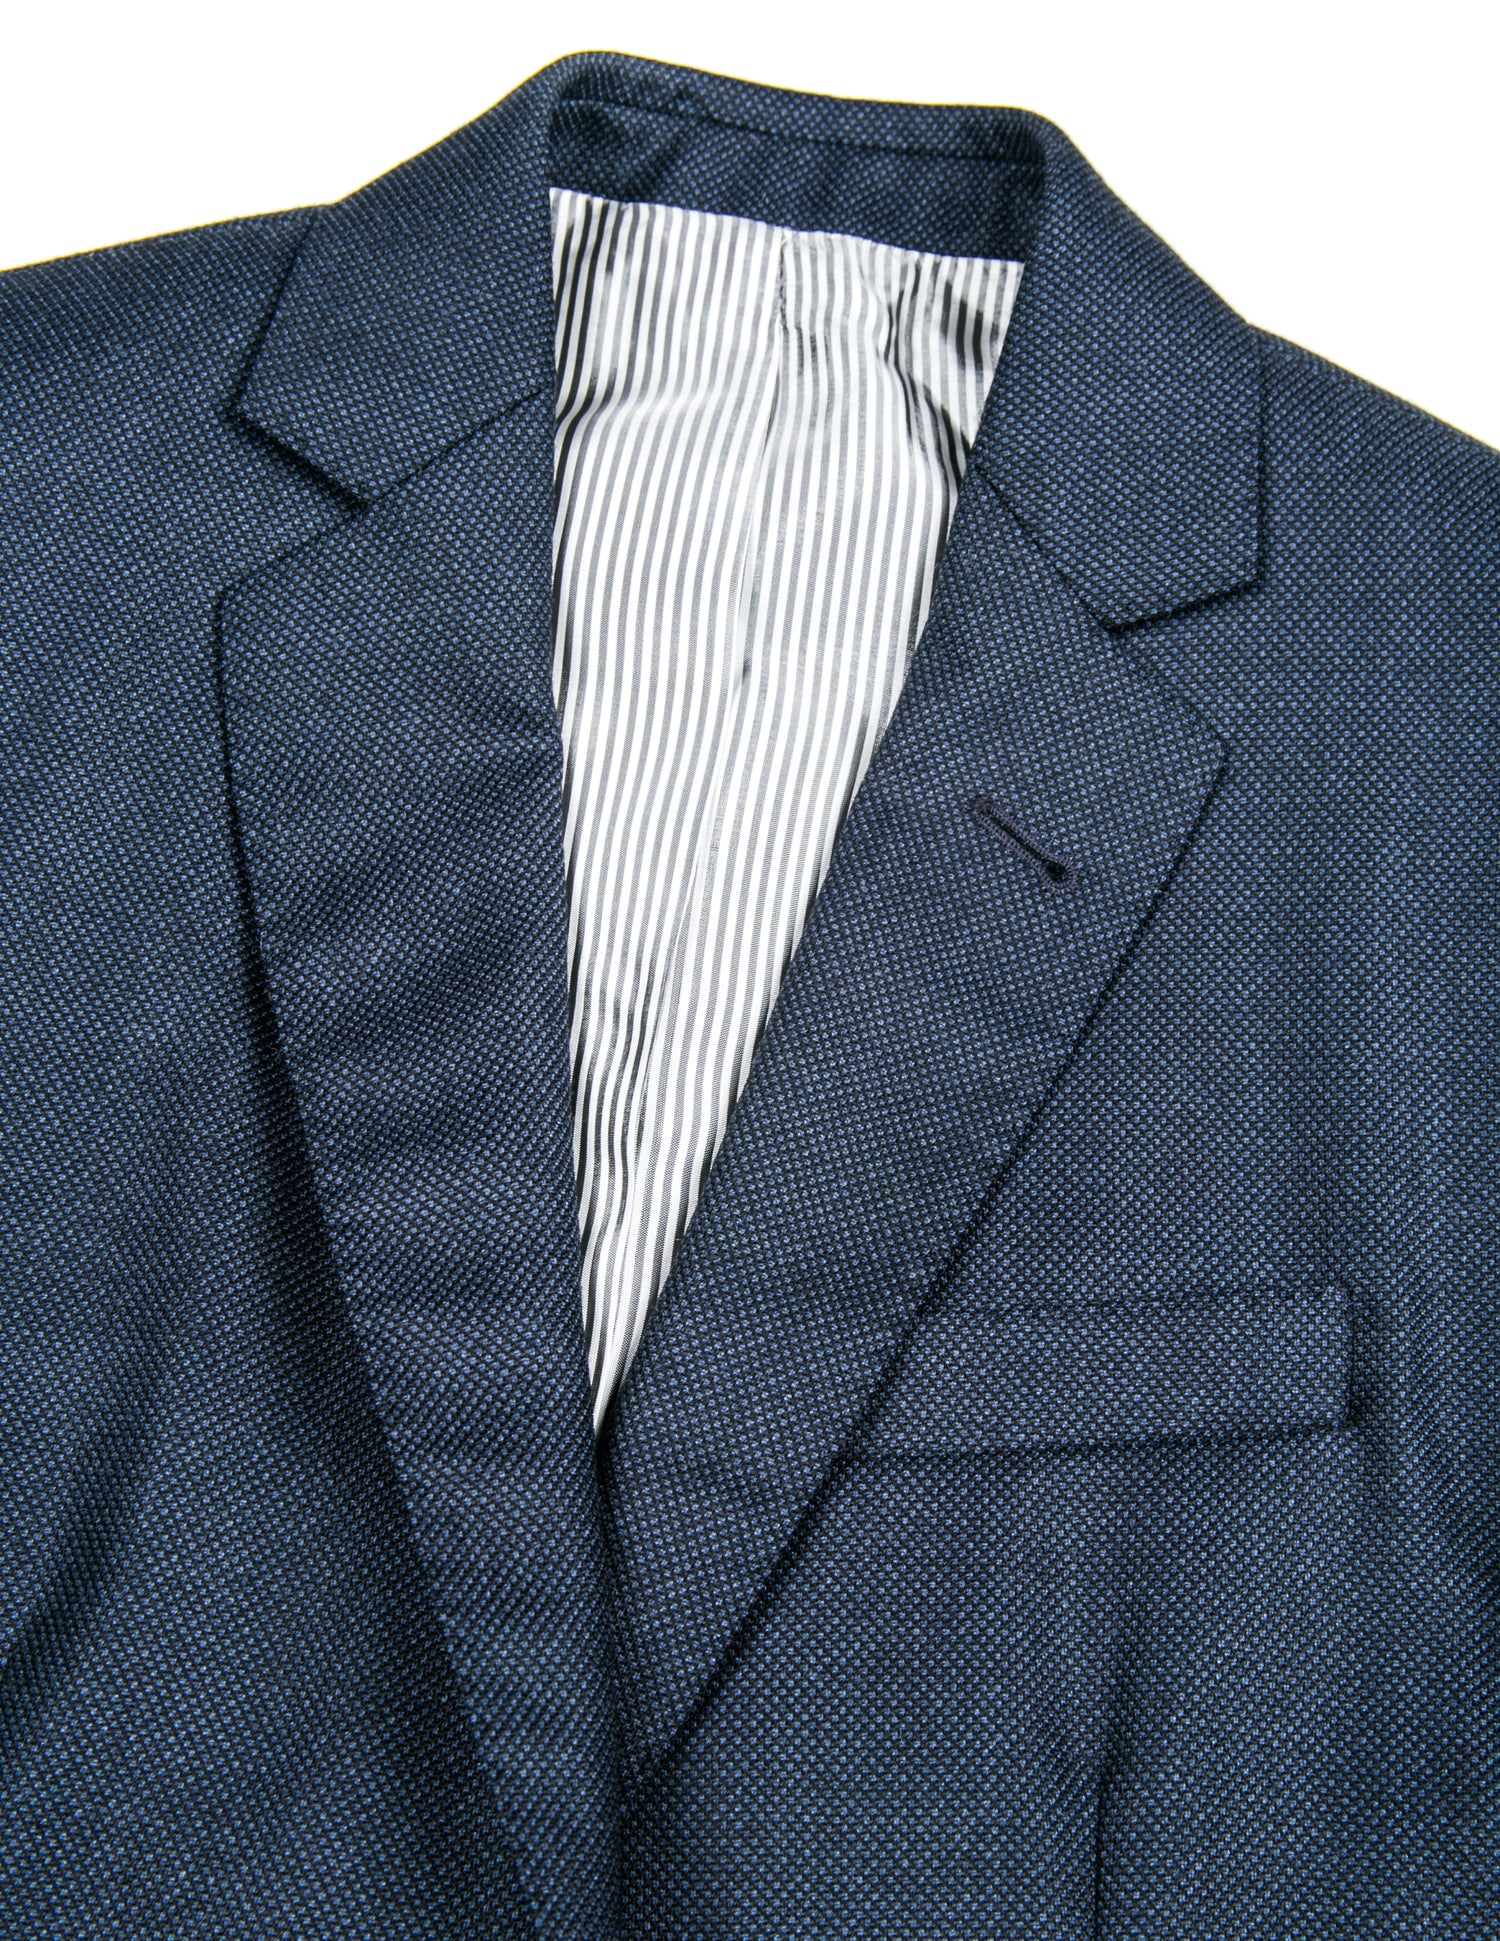 Detail of BKT50 Tailored Jacket in Birdseye Weave - Navy showing lapel , lining, and fabric texture